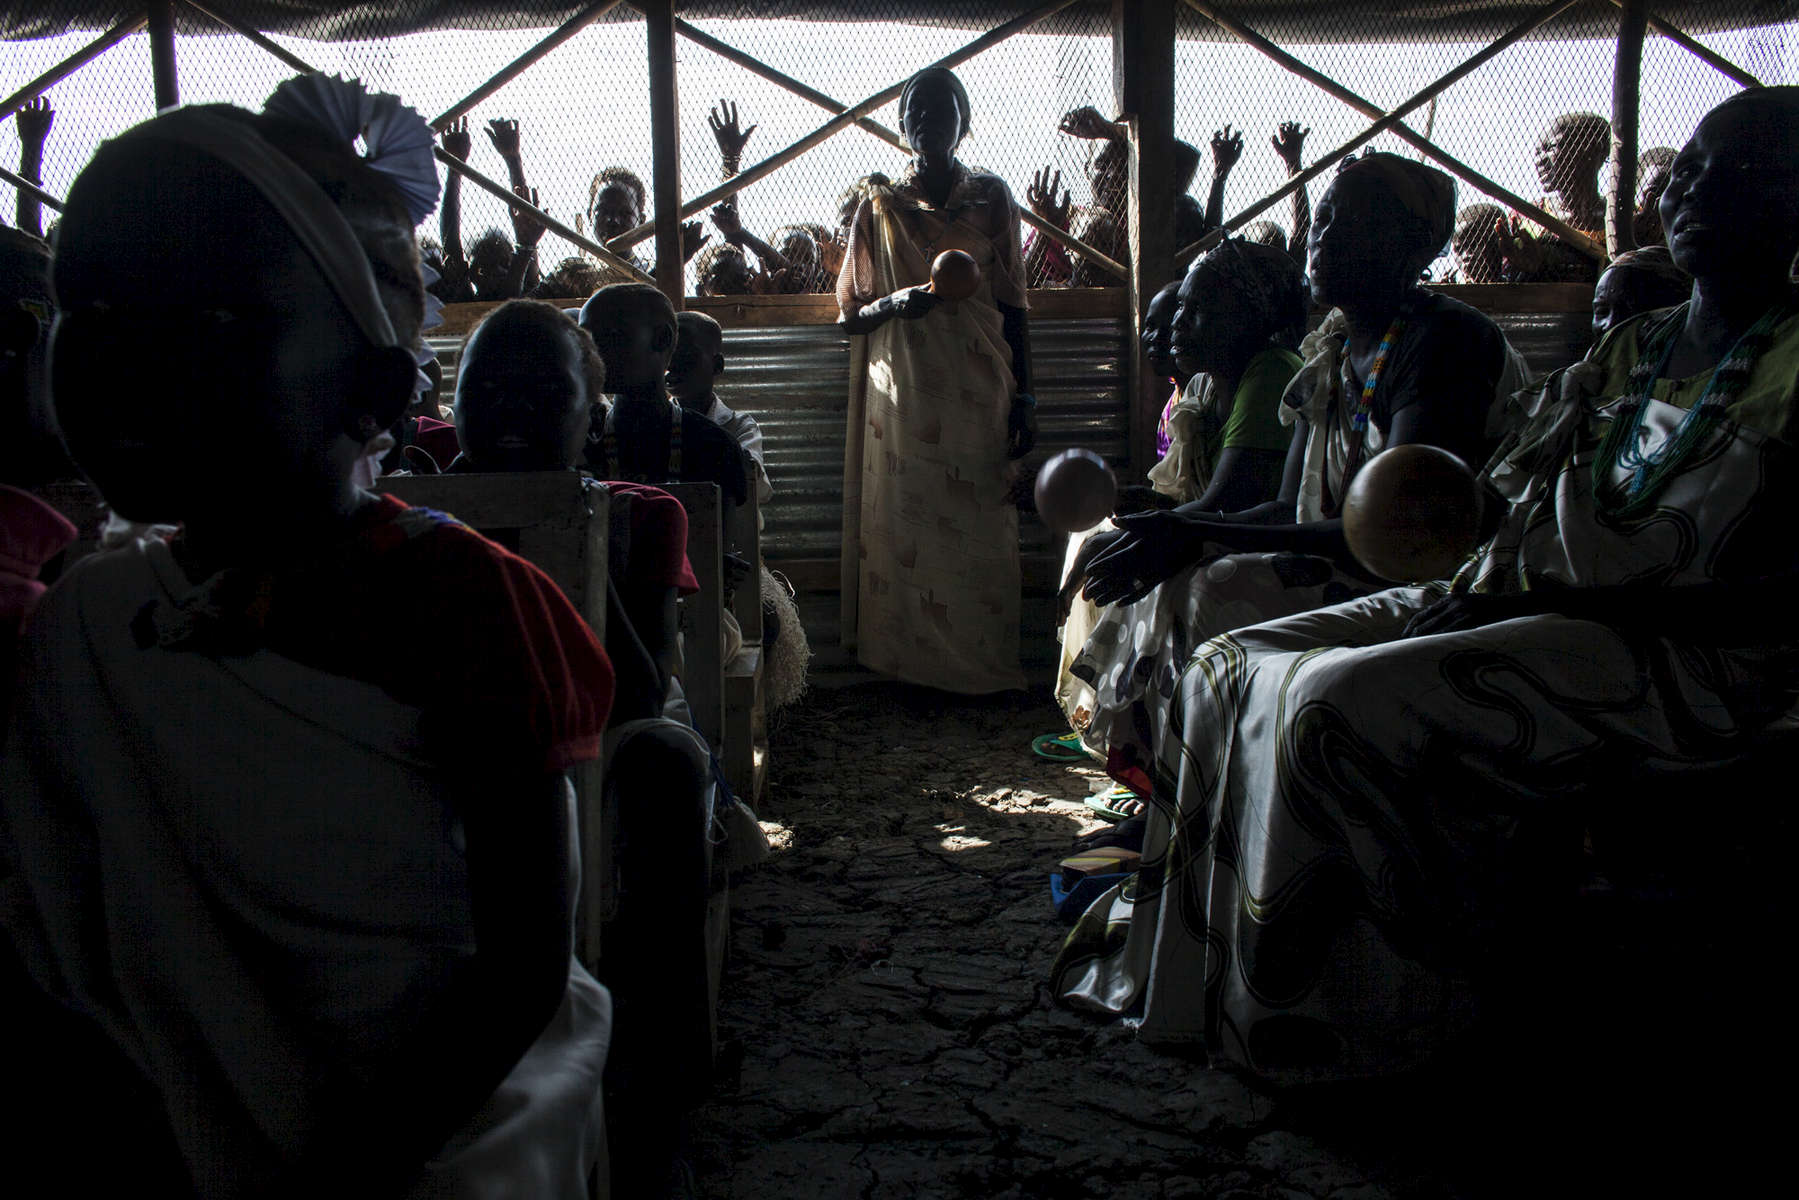 Church members pray at the Dolieb Hill Presbyterian Church in the Protection of Civilians (POC) site at the United Nations Mission in South Sudan (UNMISS) compound in Malakal, South Sudan on Saturday, July 9, 2016. The Malakal POC site houses over 32,000 displaced people mainly from the Shilluk and Nuer tribes. In February of this year, members of the Dinka tribe, who resided in the camp at the time, carried out a coordinated attack within the site leading to the destruction of hundreds of shelters and many deaths. Since then, most members of the Dinka tribe have fled to Malakal town where they occupy the homes of those still displaced. 